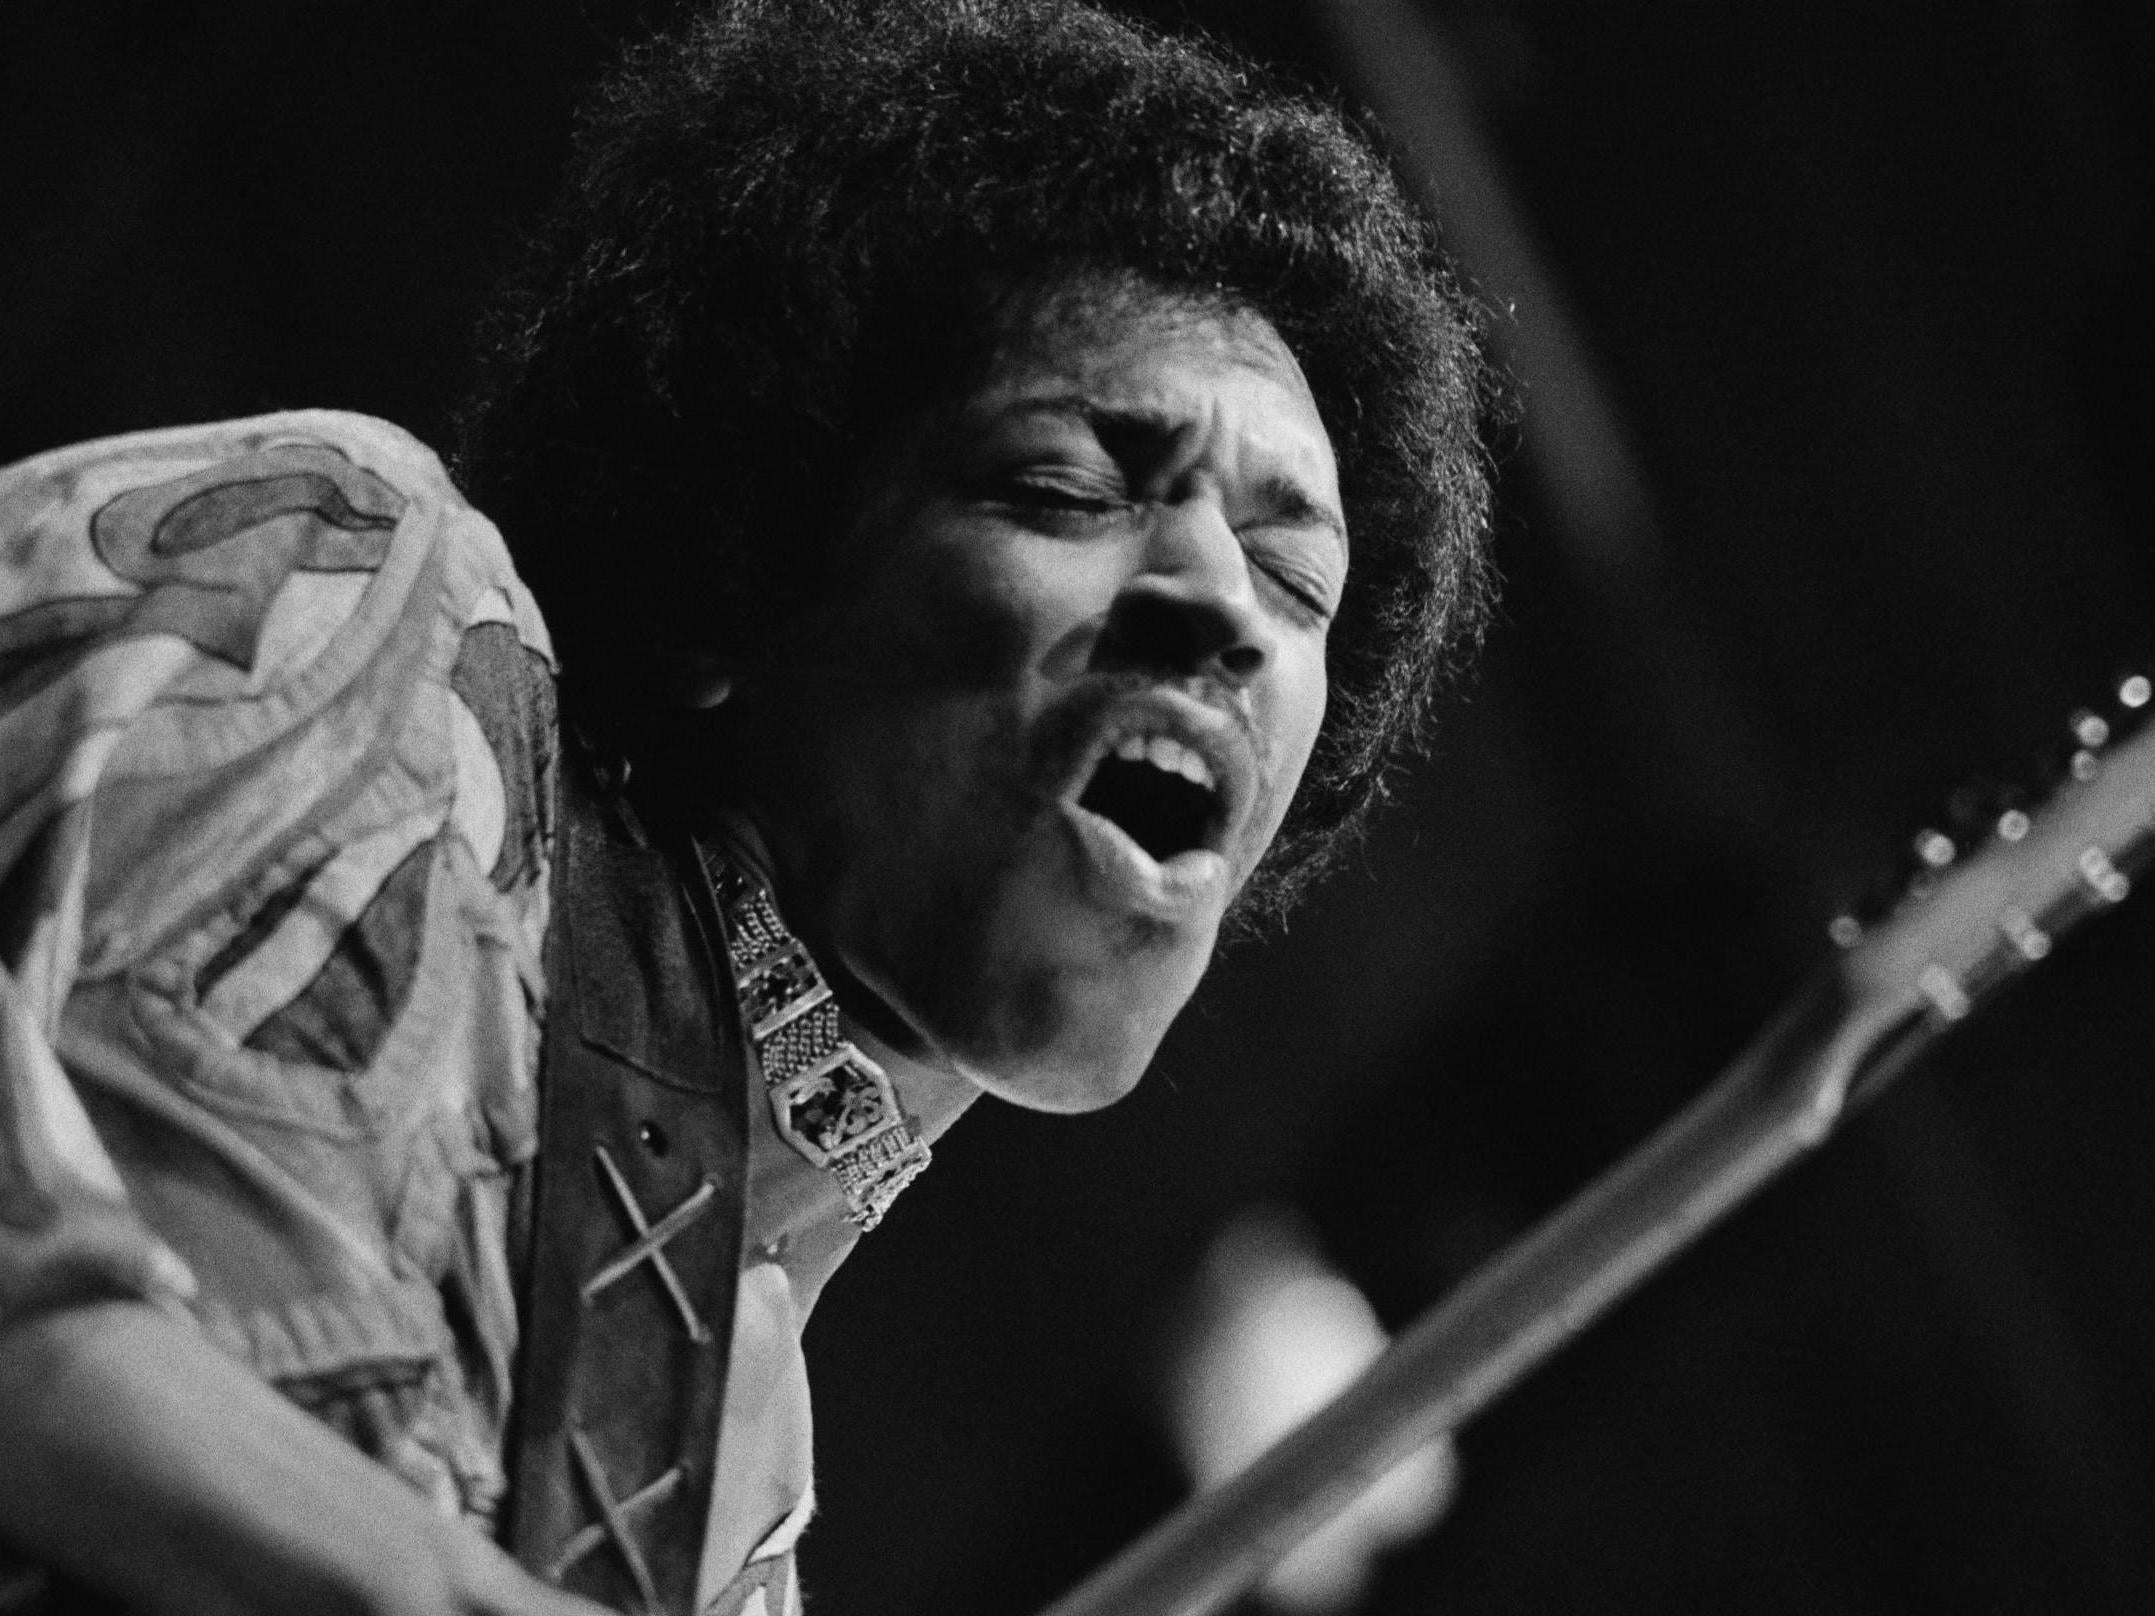 ;We didn’t even bother to arrange his transport for him': Jimi Hendrix performing at the Isle of Wight Festival in 1970